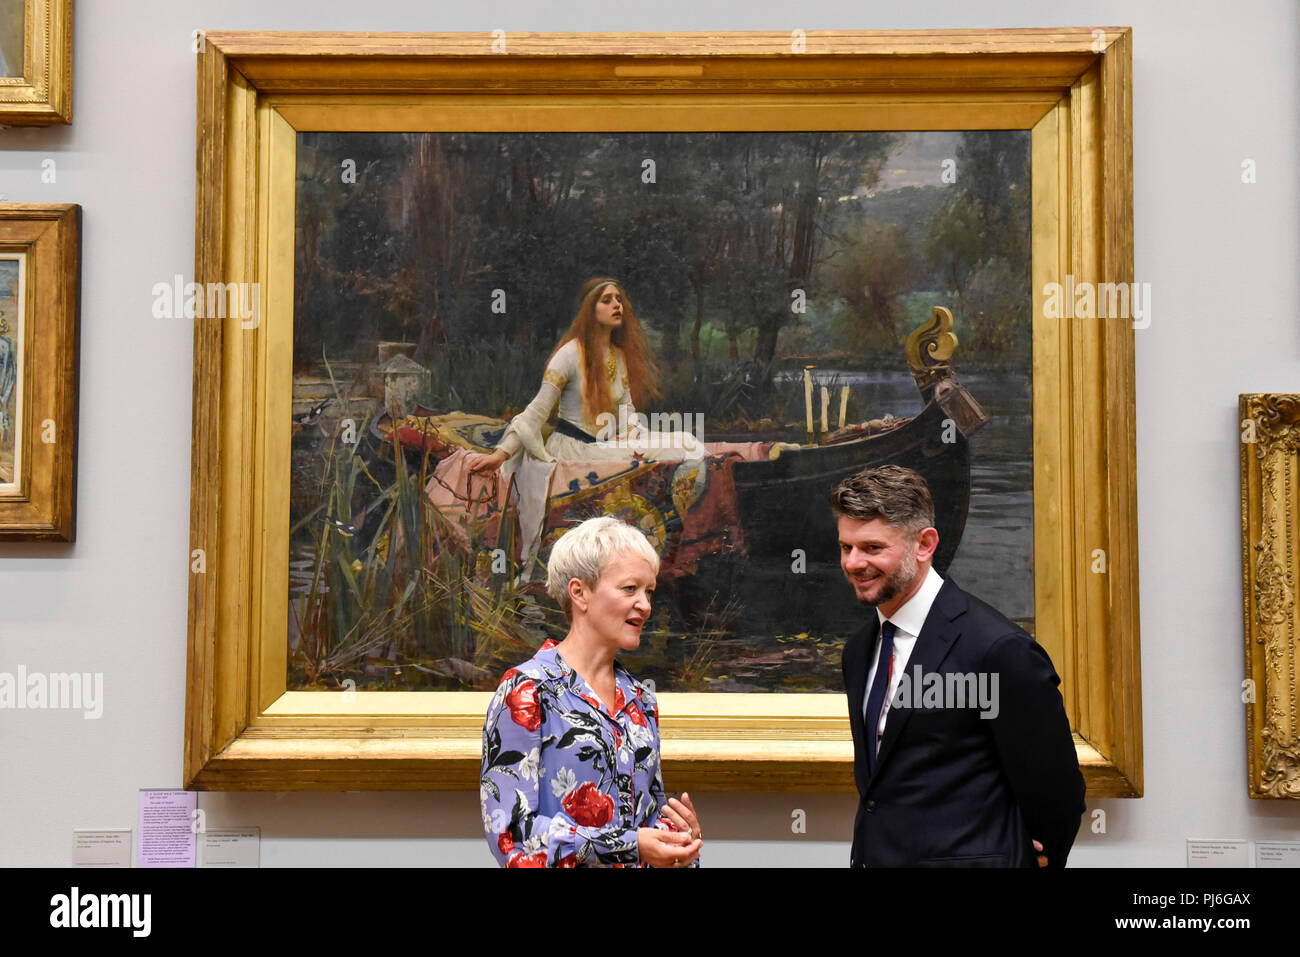 London, UK.  5 September 2018.  Maria Balshaw, Director of Tate, and Nick Mitzevich, Director of the National Gallery of Australia, pose with 'The Lady of Shalott', 1888, by John William Waterhouse, at Tate Britain, to mark the launch of a major new exhibition at the National Gallery of Australia (NGA) in December 2018.  Over forty Pre-Raphaelite works will be loaned by Tate to NGA, which have never been shown in Australia until now, including 'Ophelia', 1851-52, by John Everett Millais and 'The Lady of Shalott', 1888, by John William Waterhouse. Credit: Stephen Chung / Alamy Live News Stock Photo